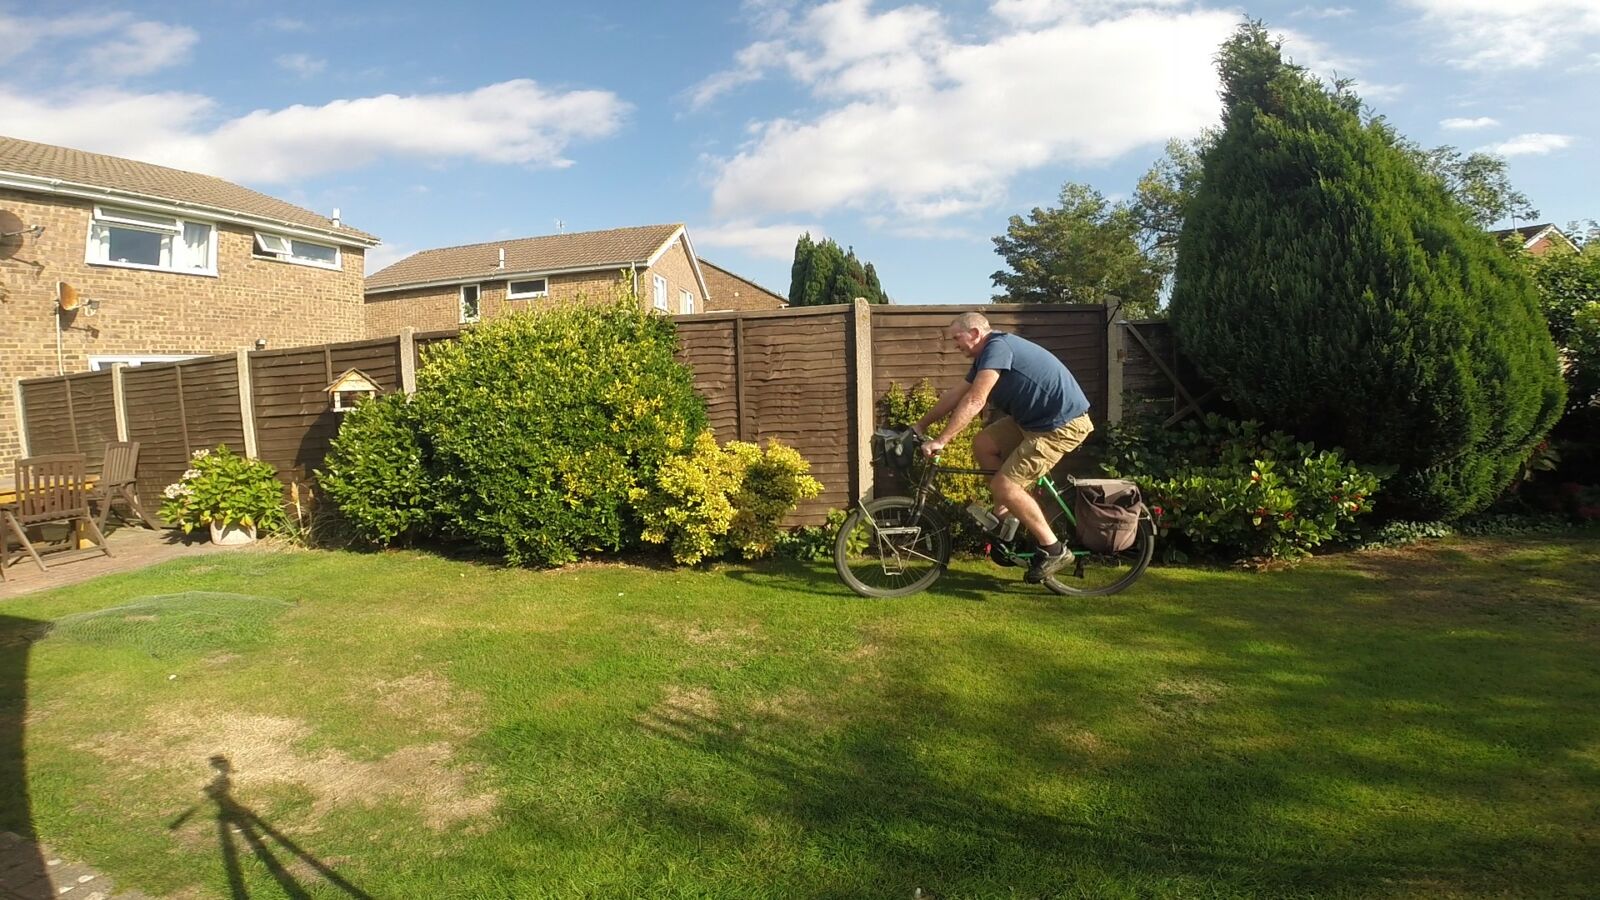 Garry McGivern riding his bike in his garden